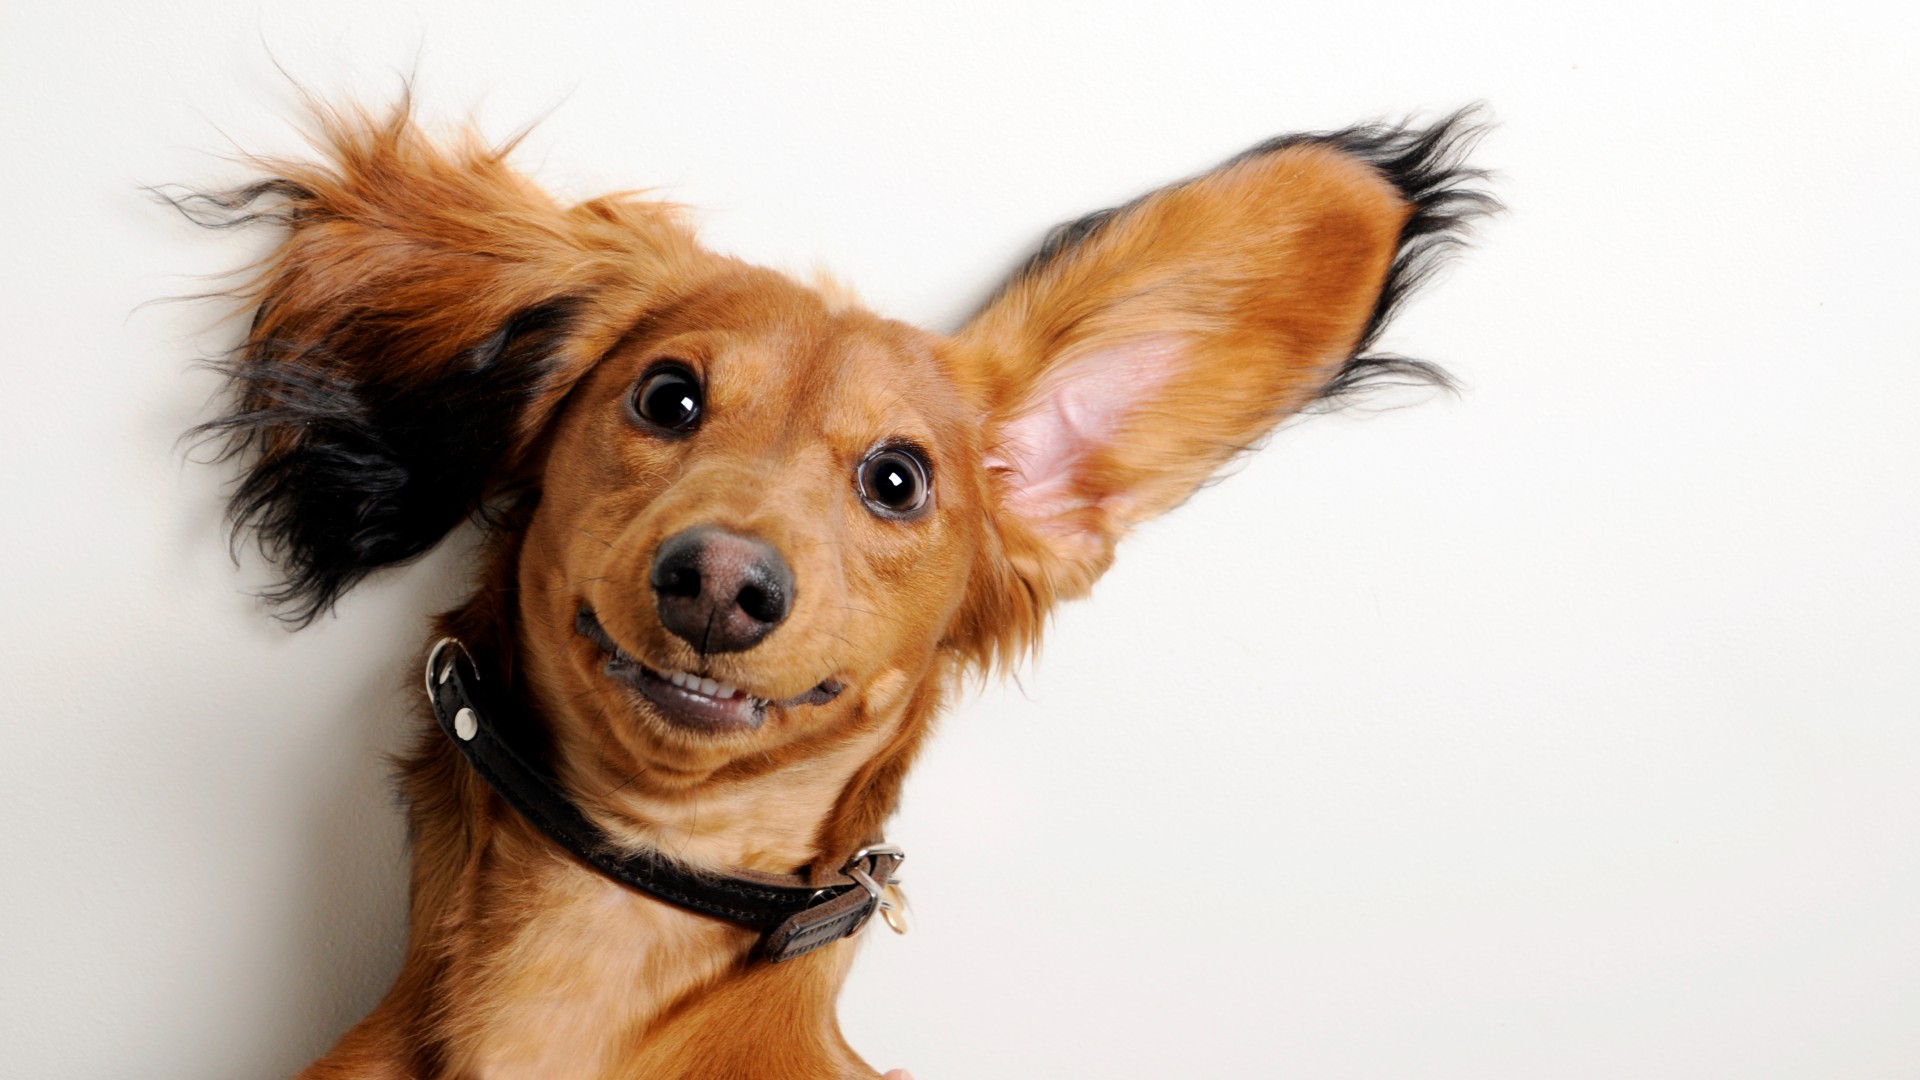 A smiling dog lying down with one ear flopped up on a white background.